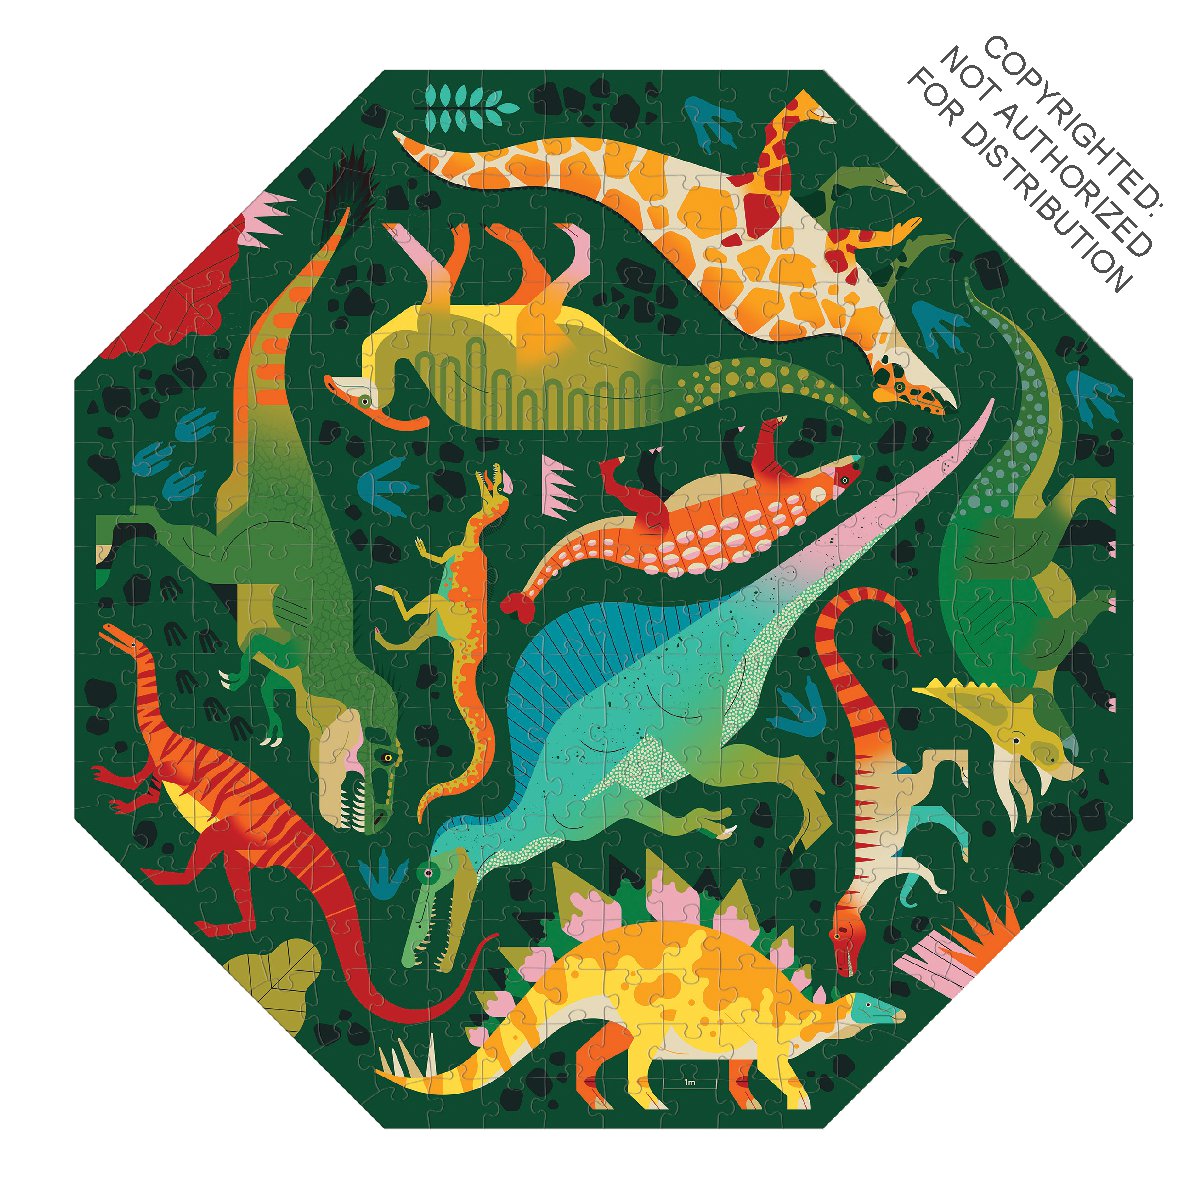 Dinosaurs to Scale 300 Piece Octagon Shaped Puzzle